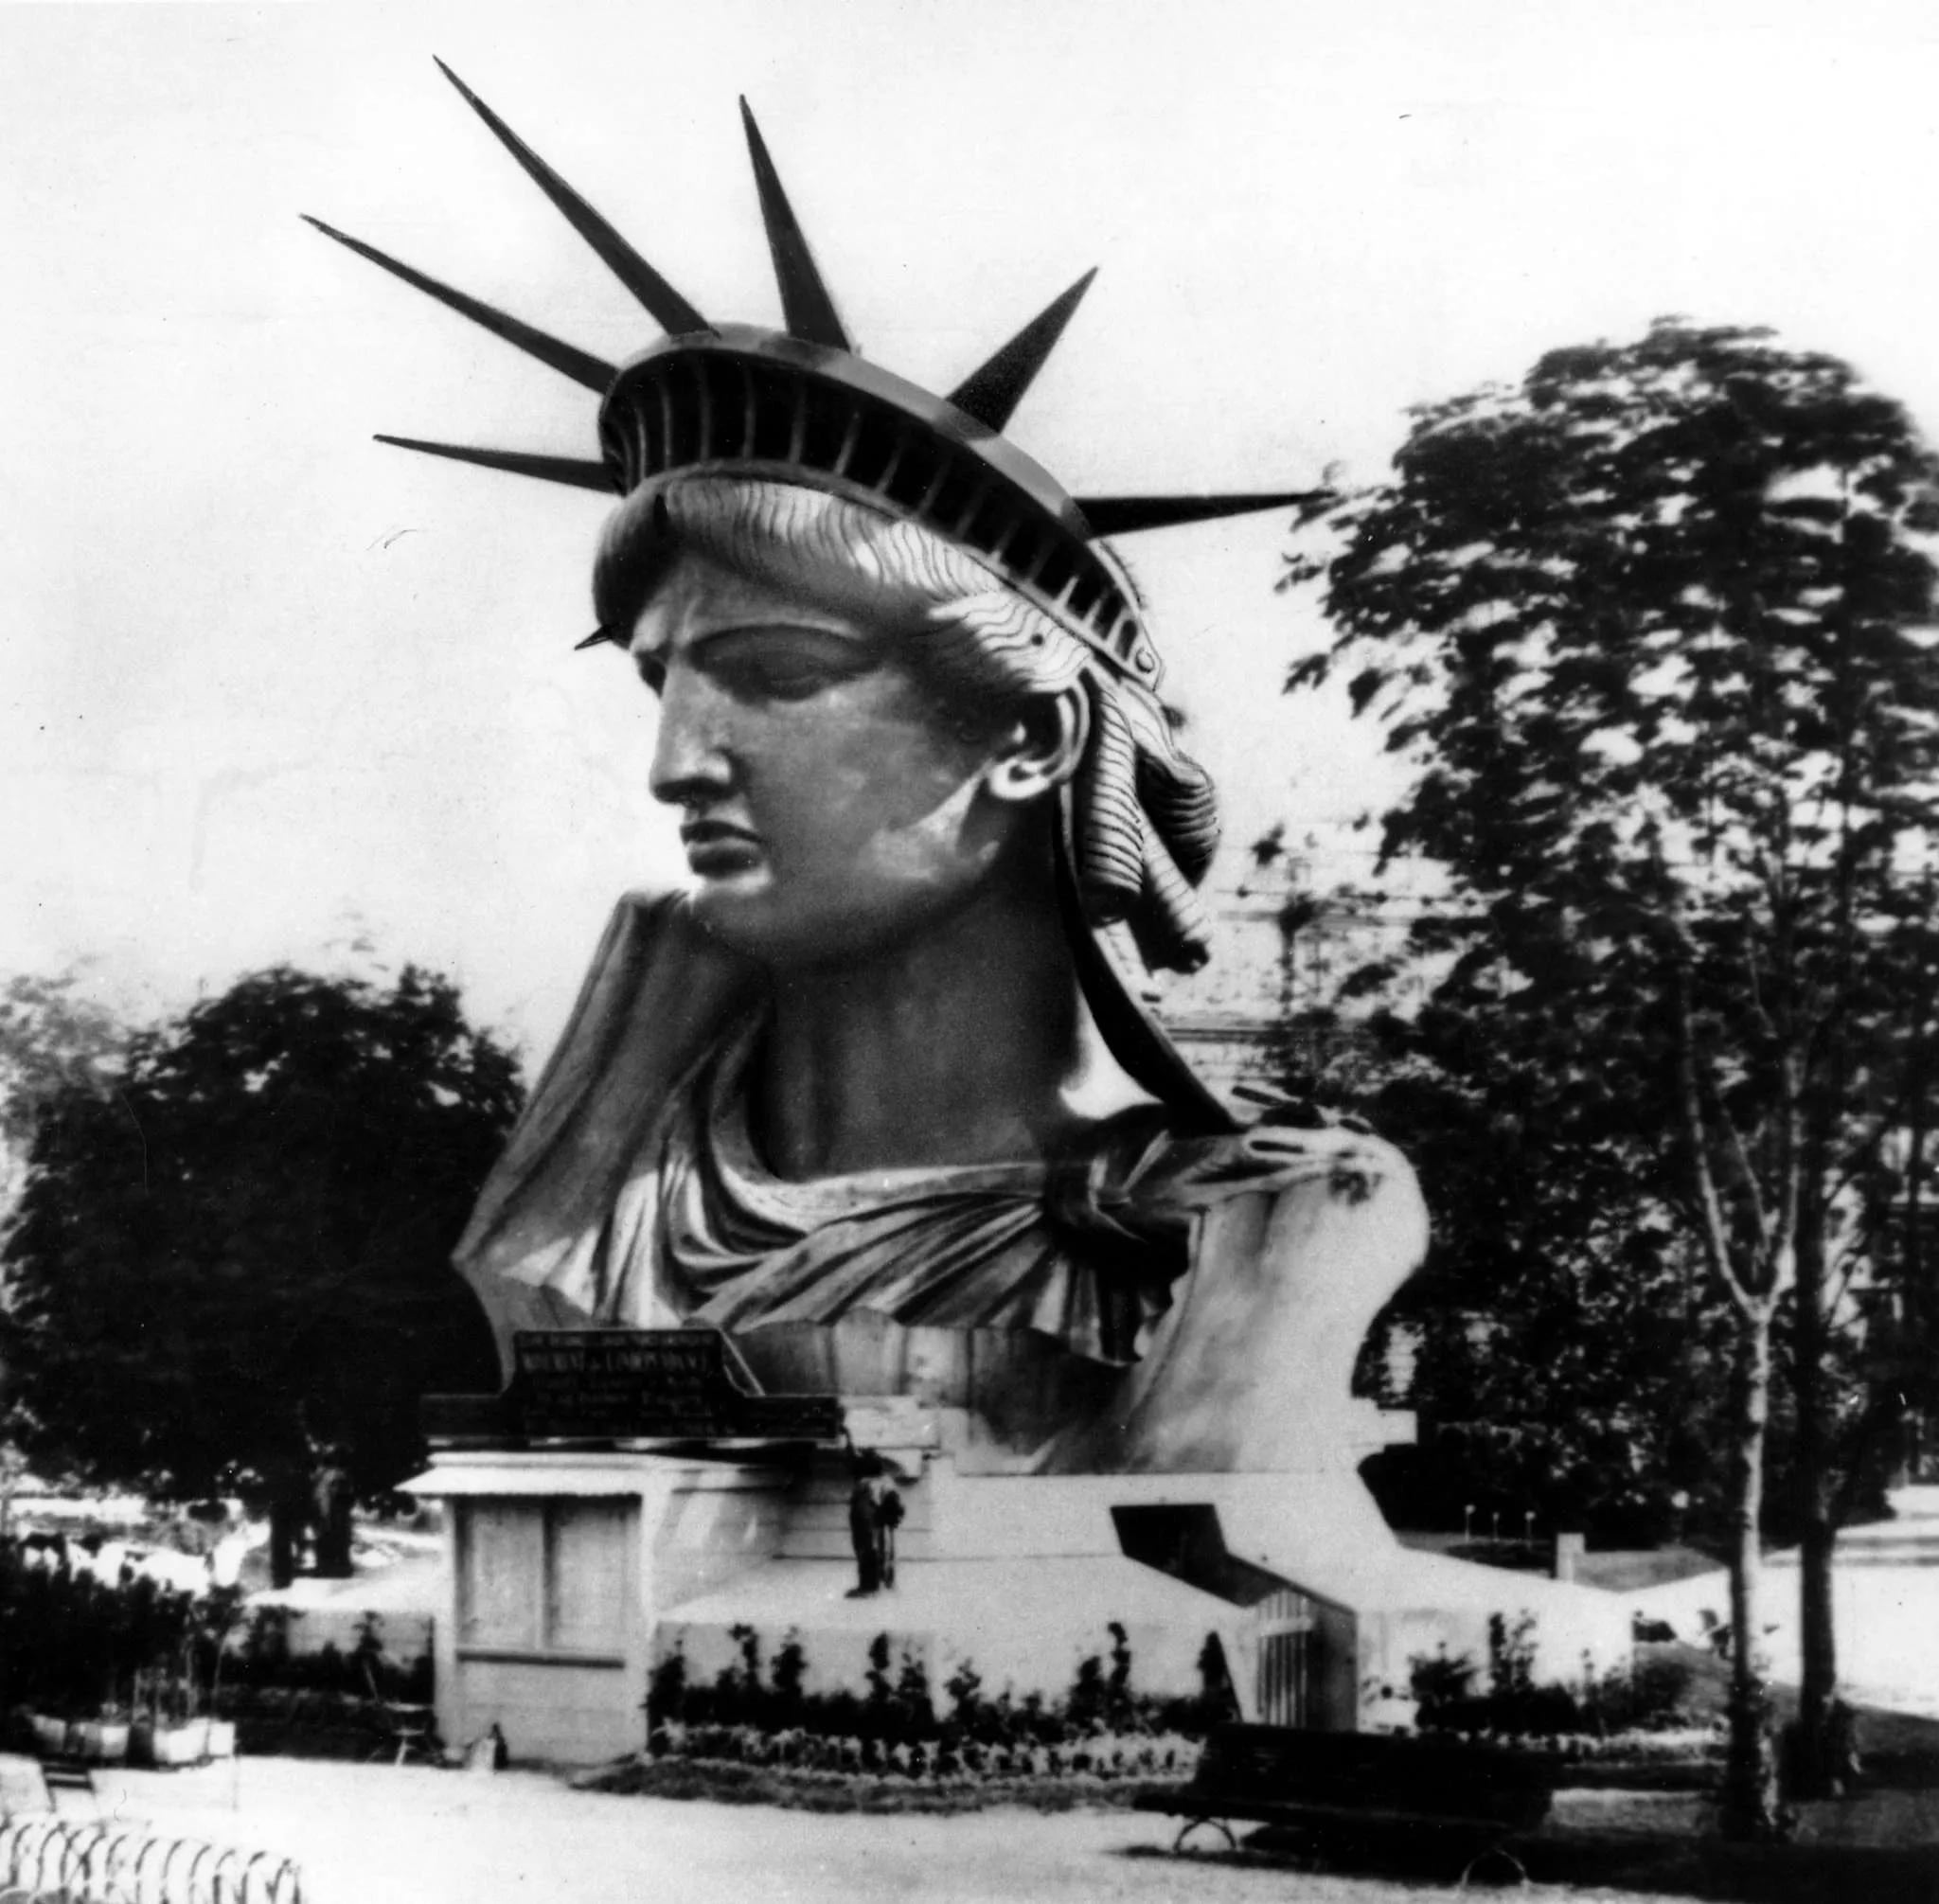 Statue of Liberty's head and shoulders on display at the 1878 World's Fair in Paris. Completion by sculptor Auguste Bartholdi